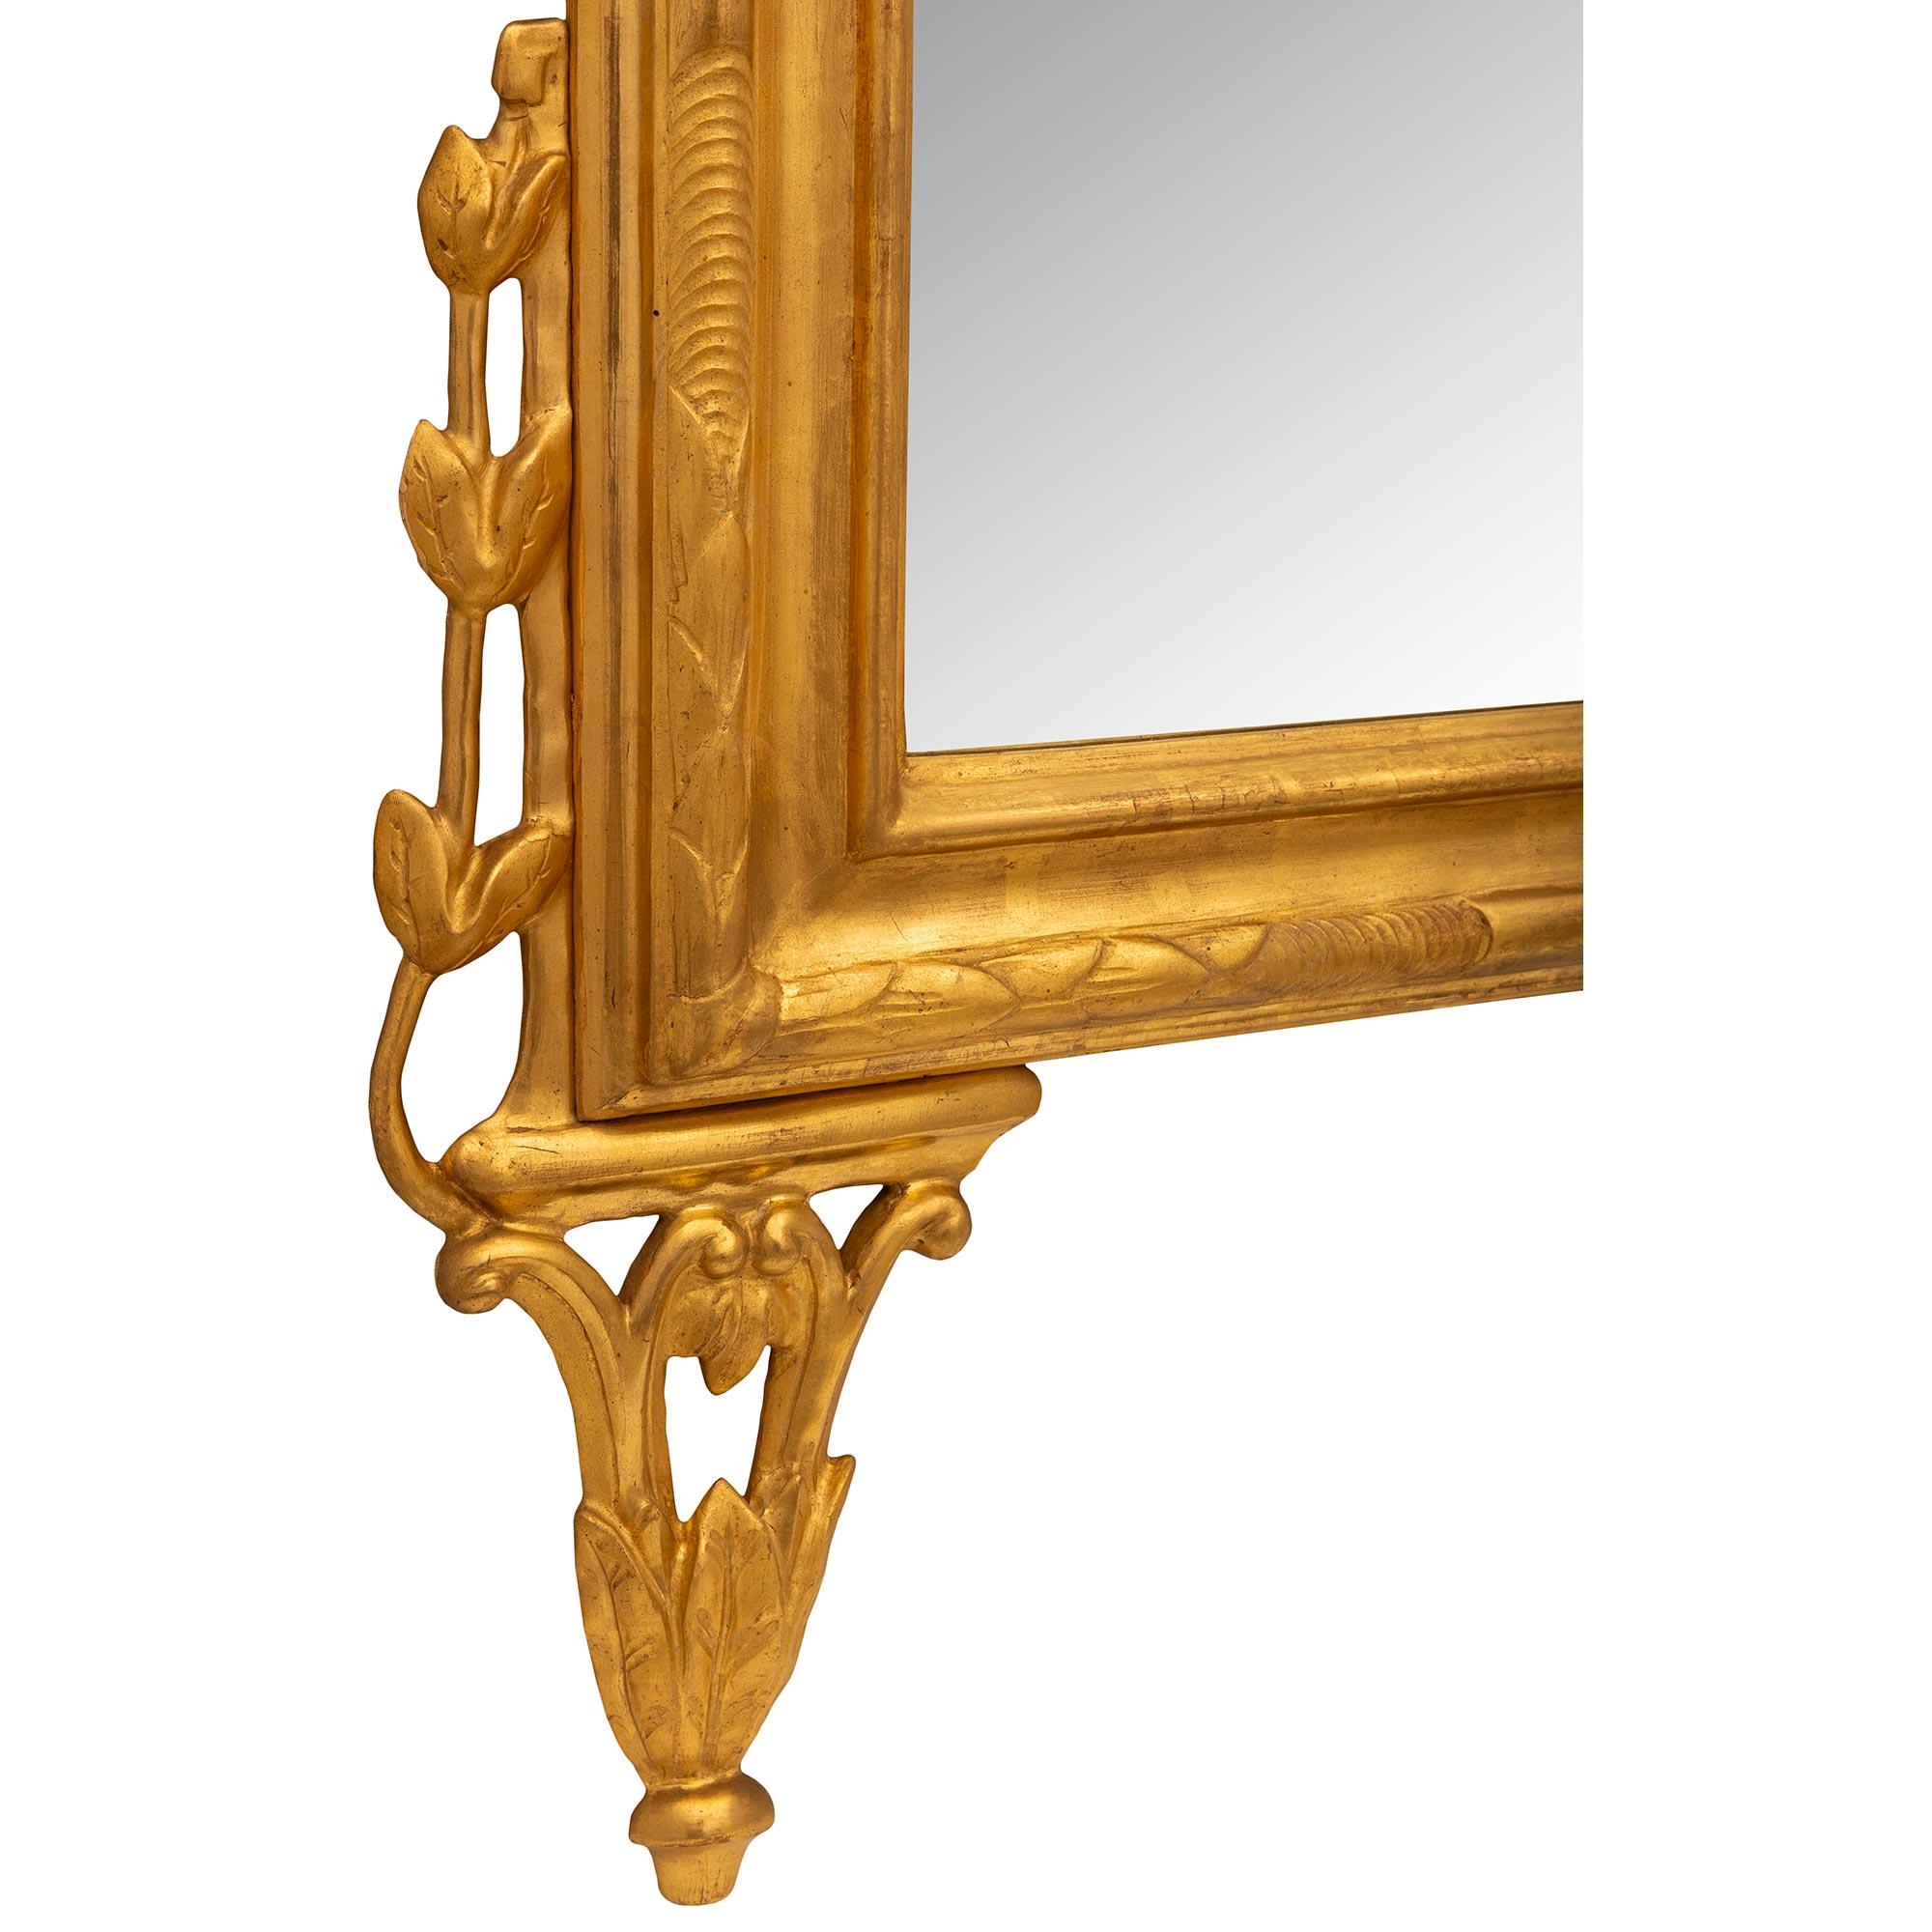 Italian 18th Century Louis XIV Period Giltwood And Silvered Mecca Mirror For Sale 3